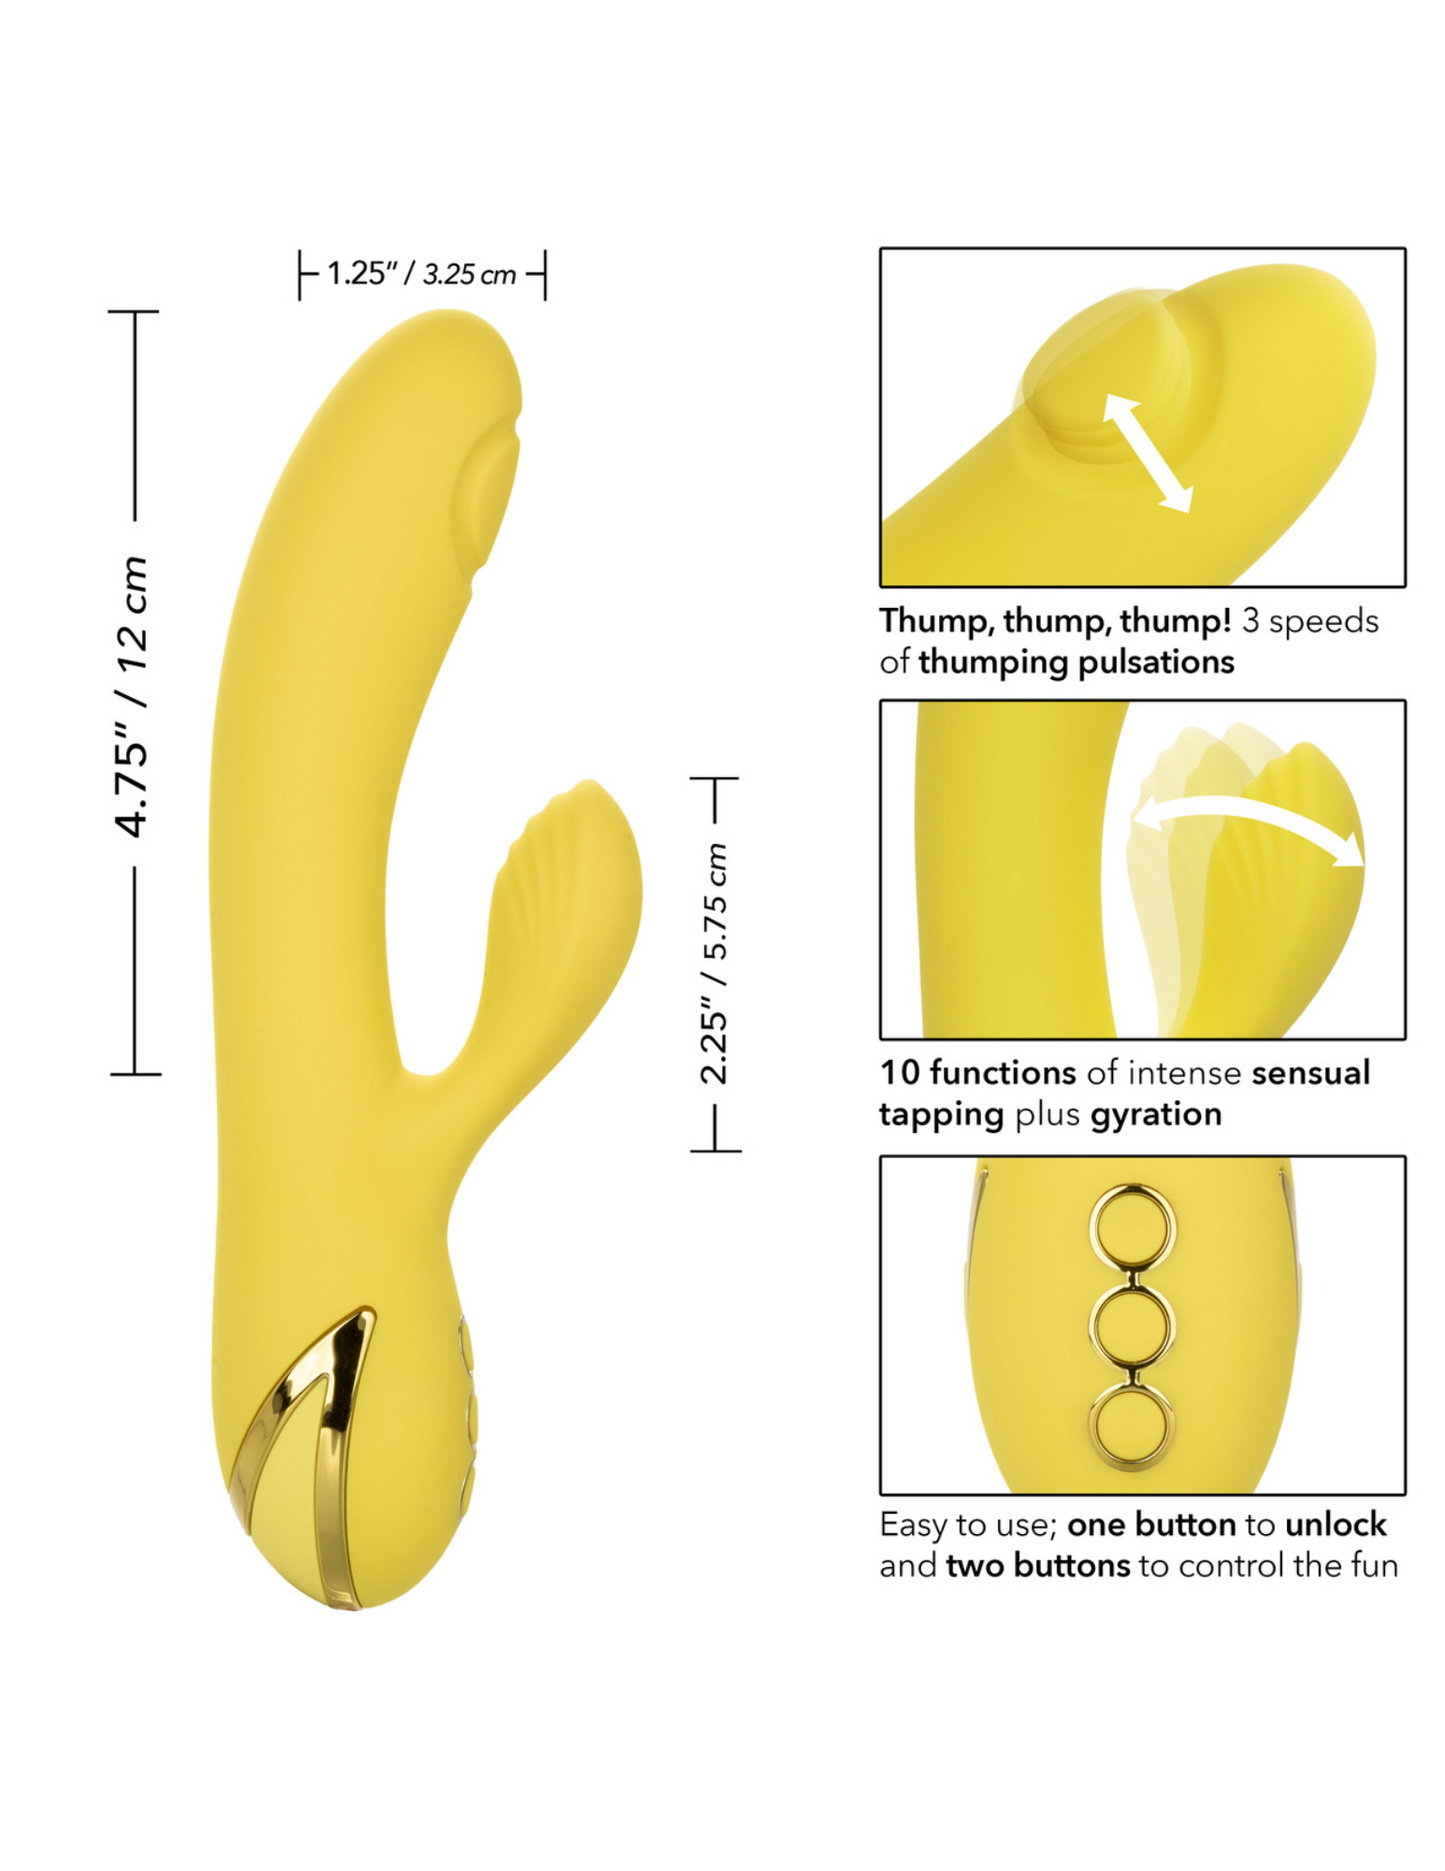 Diagram shows the dimensions and features of the California Dreaming San Diego Seduction Vibrator (yellow) from CalExotics.